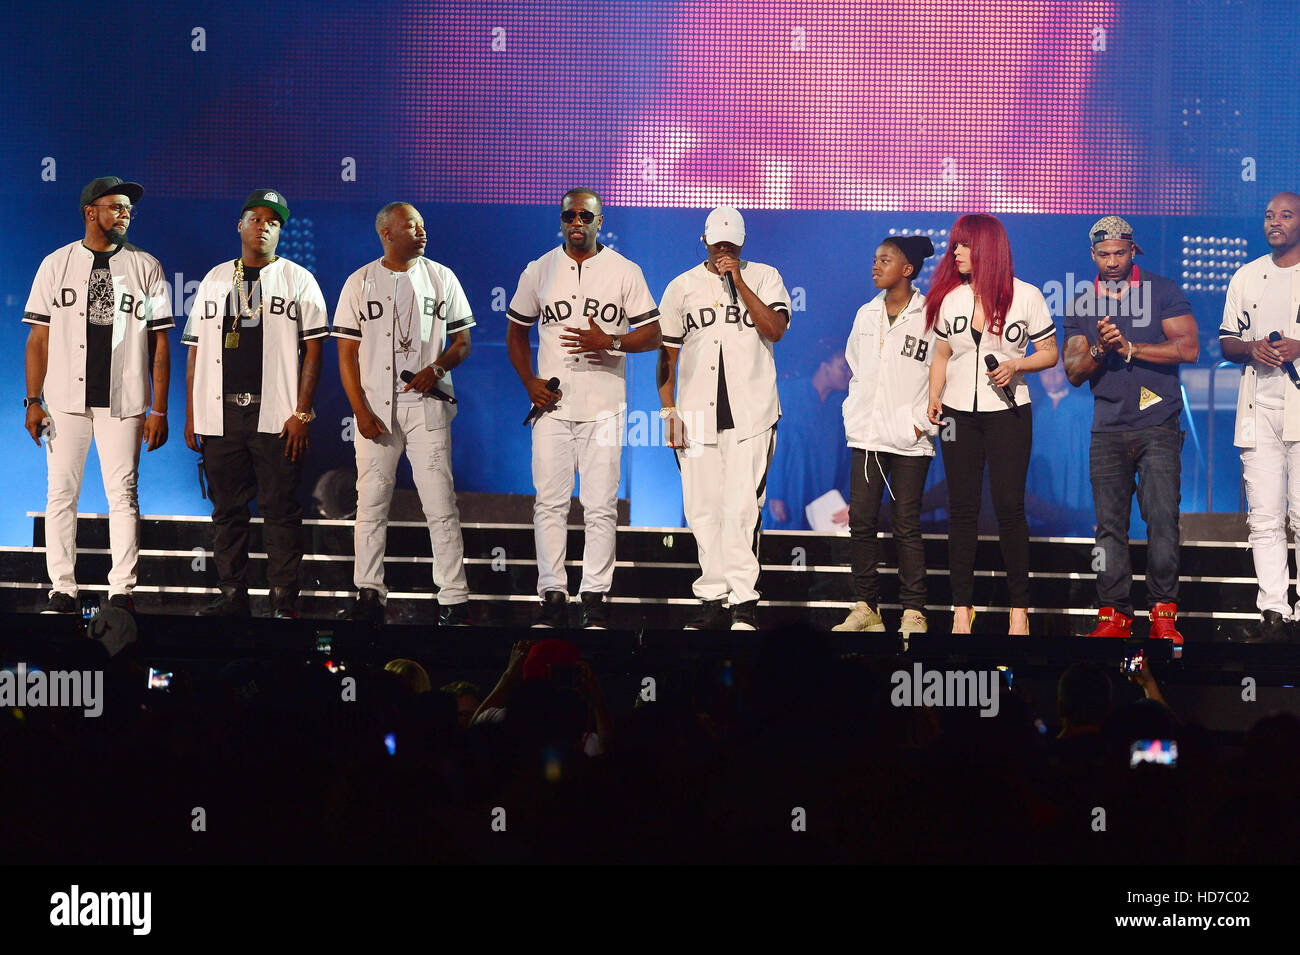 The Lox, 112, Mase, Sean Combs, Faith Evans and Stevie J perform onstage during the Bad Boy Family Reunion Tour at the American Airlines Arena in Miami, Florida.  Featuring: The Lox, 112, Mase, Sean 'Diddy' Combs, Faith Evans, Stevie J Where: Miami, Flori Stock Photo